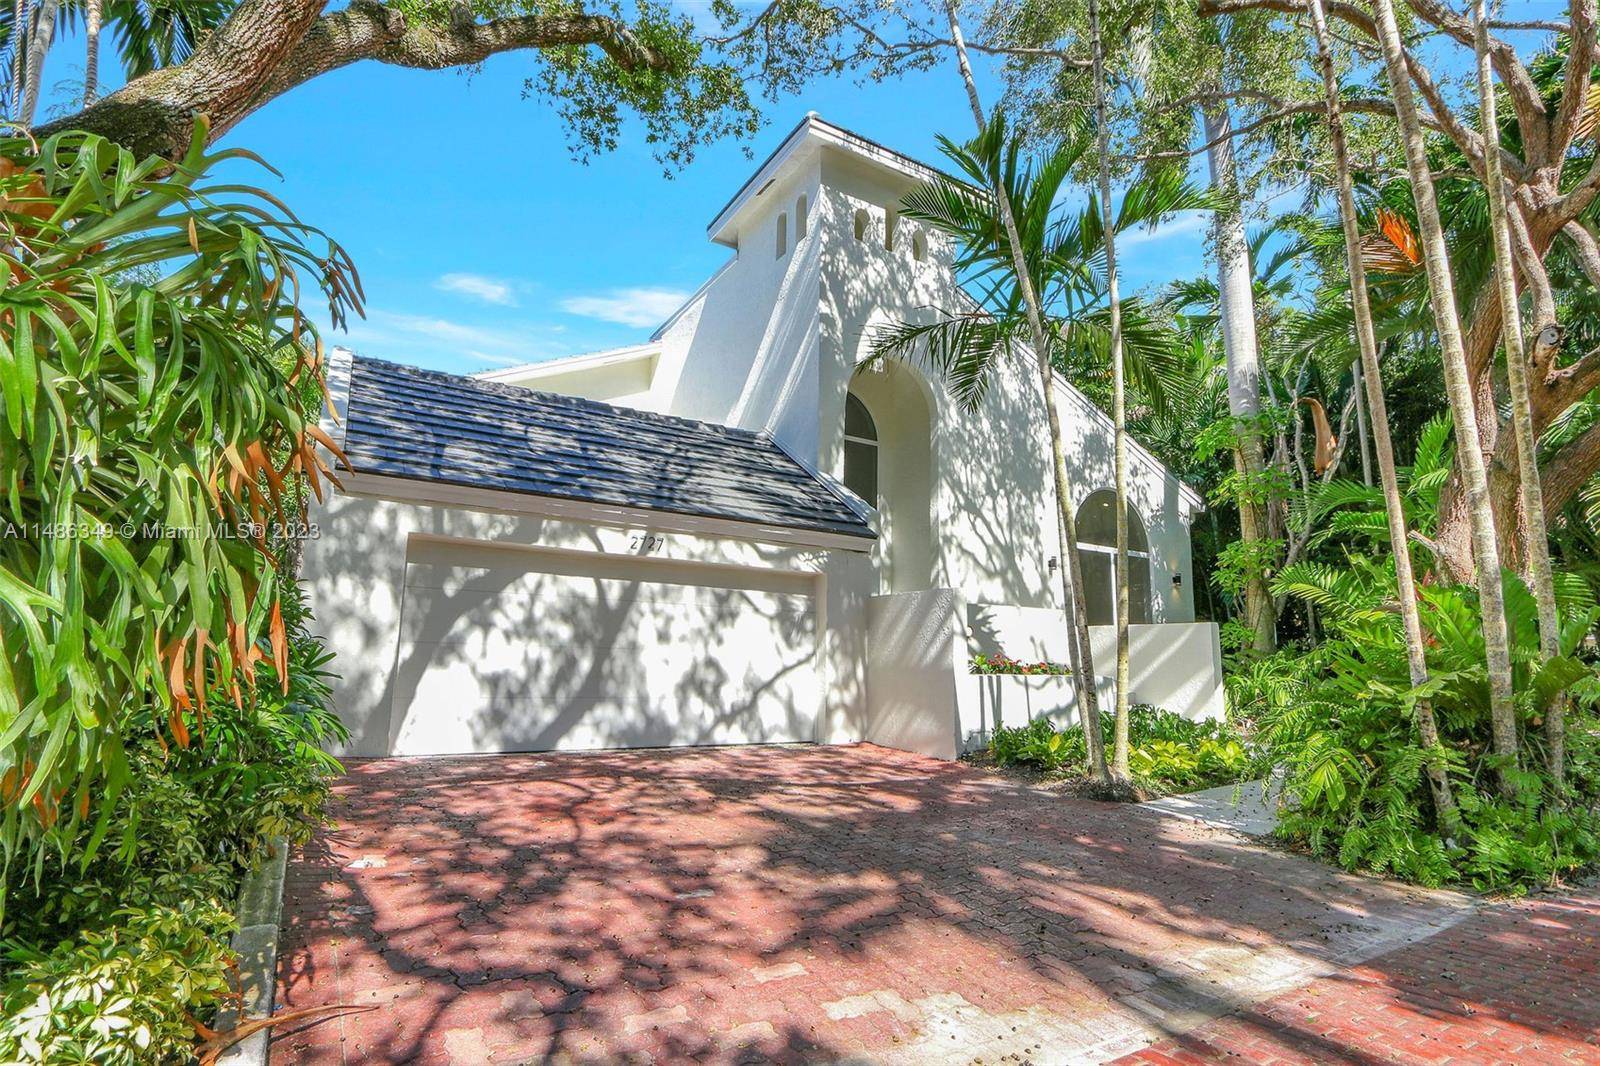 Brand new renovation inside a secure gated community in a quiet corner of Coconut Grove.